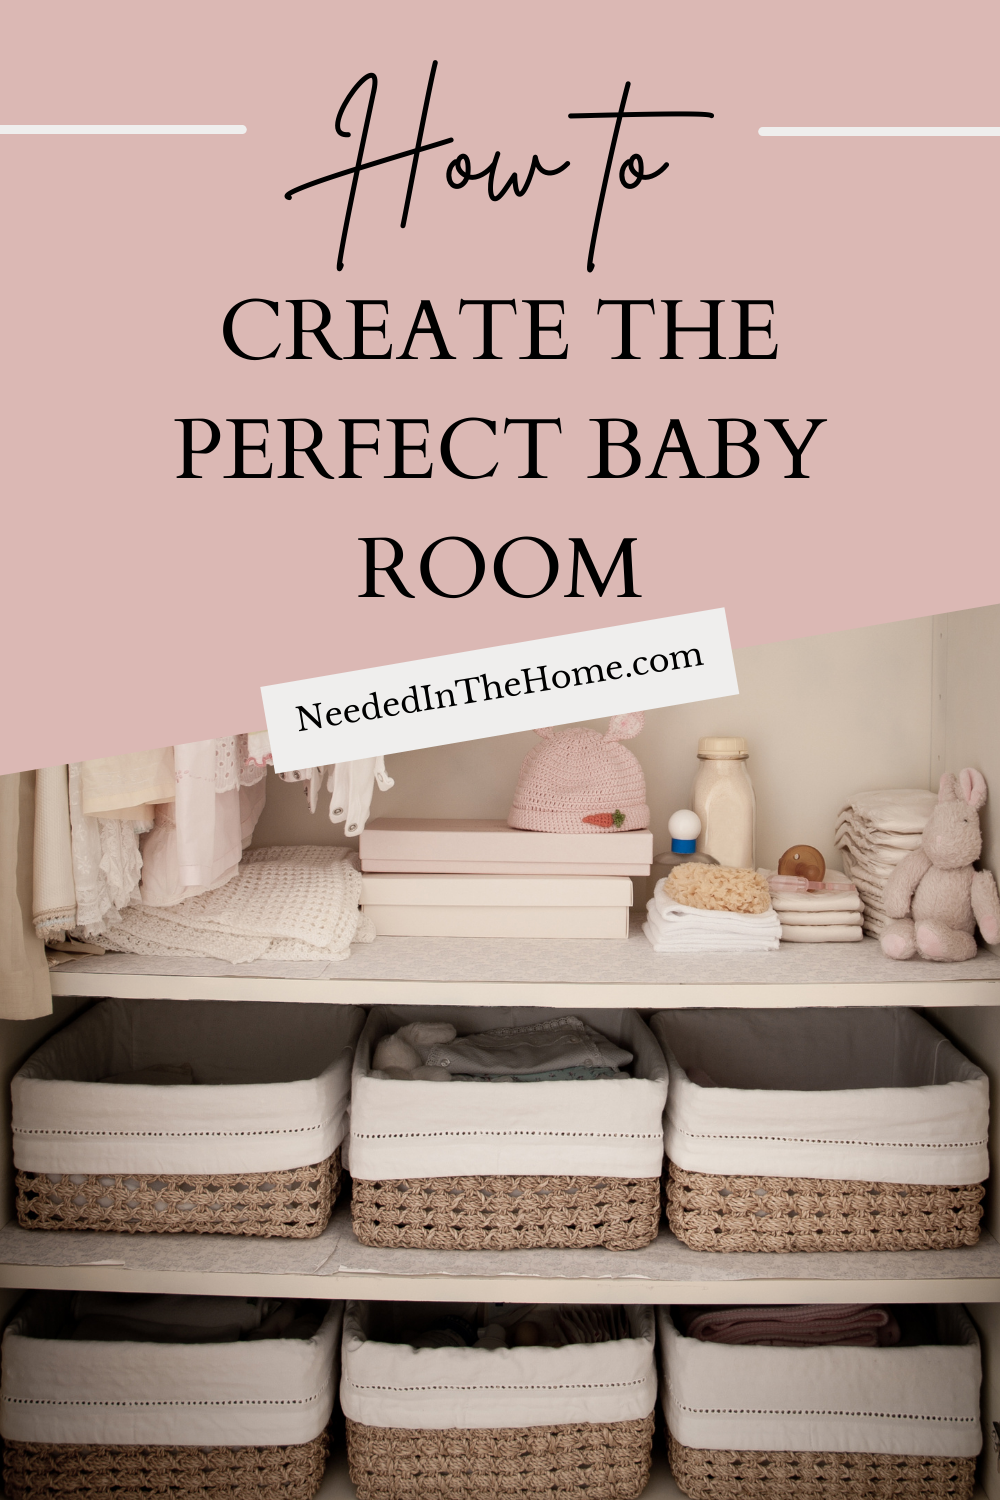 pinterest-pin-description how to create the perfect baby room organized closet in baby room nursery baskets diapers neededinthehome